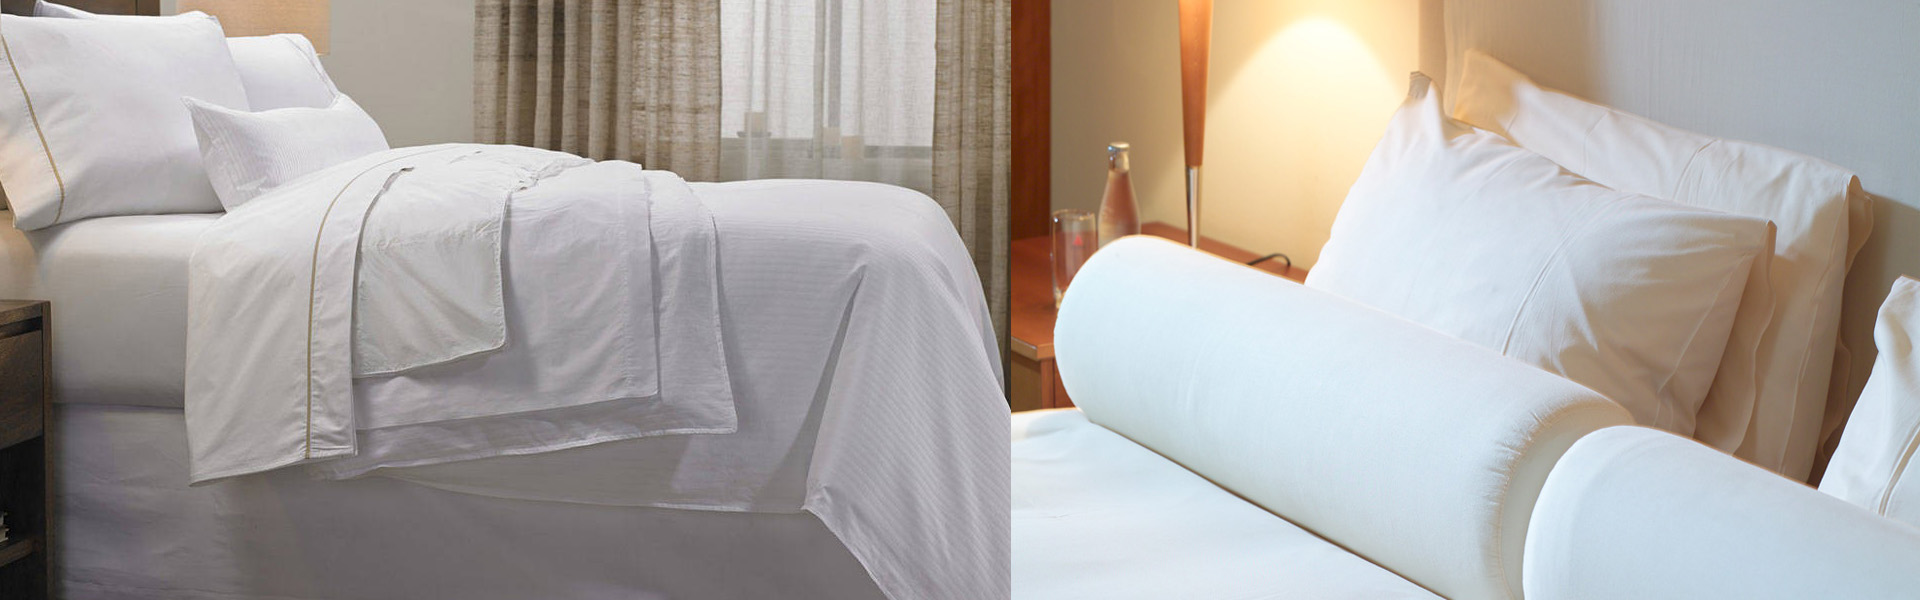 QUALITY<br>HOTEL LINENS